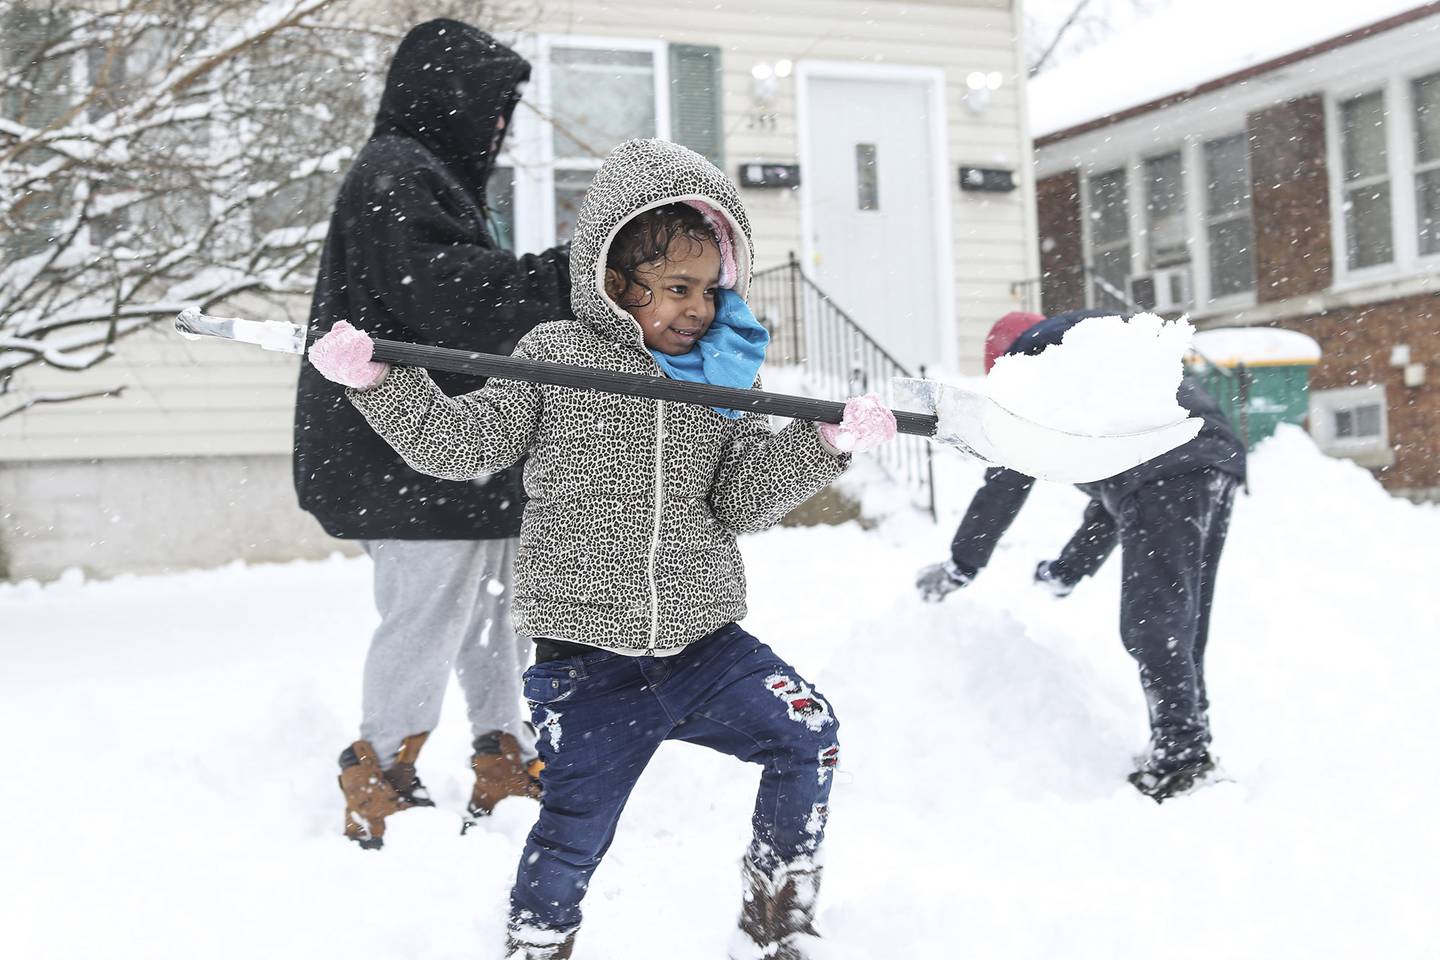 Amor Stevenson helps her family clear snow on Sunday, Jan. 31, 2021, in front of her family's home in Joliet, Ill. Nearly a foot of snow covered Will County overnight, resulting in fun for some and challenges for others.